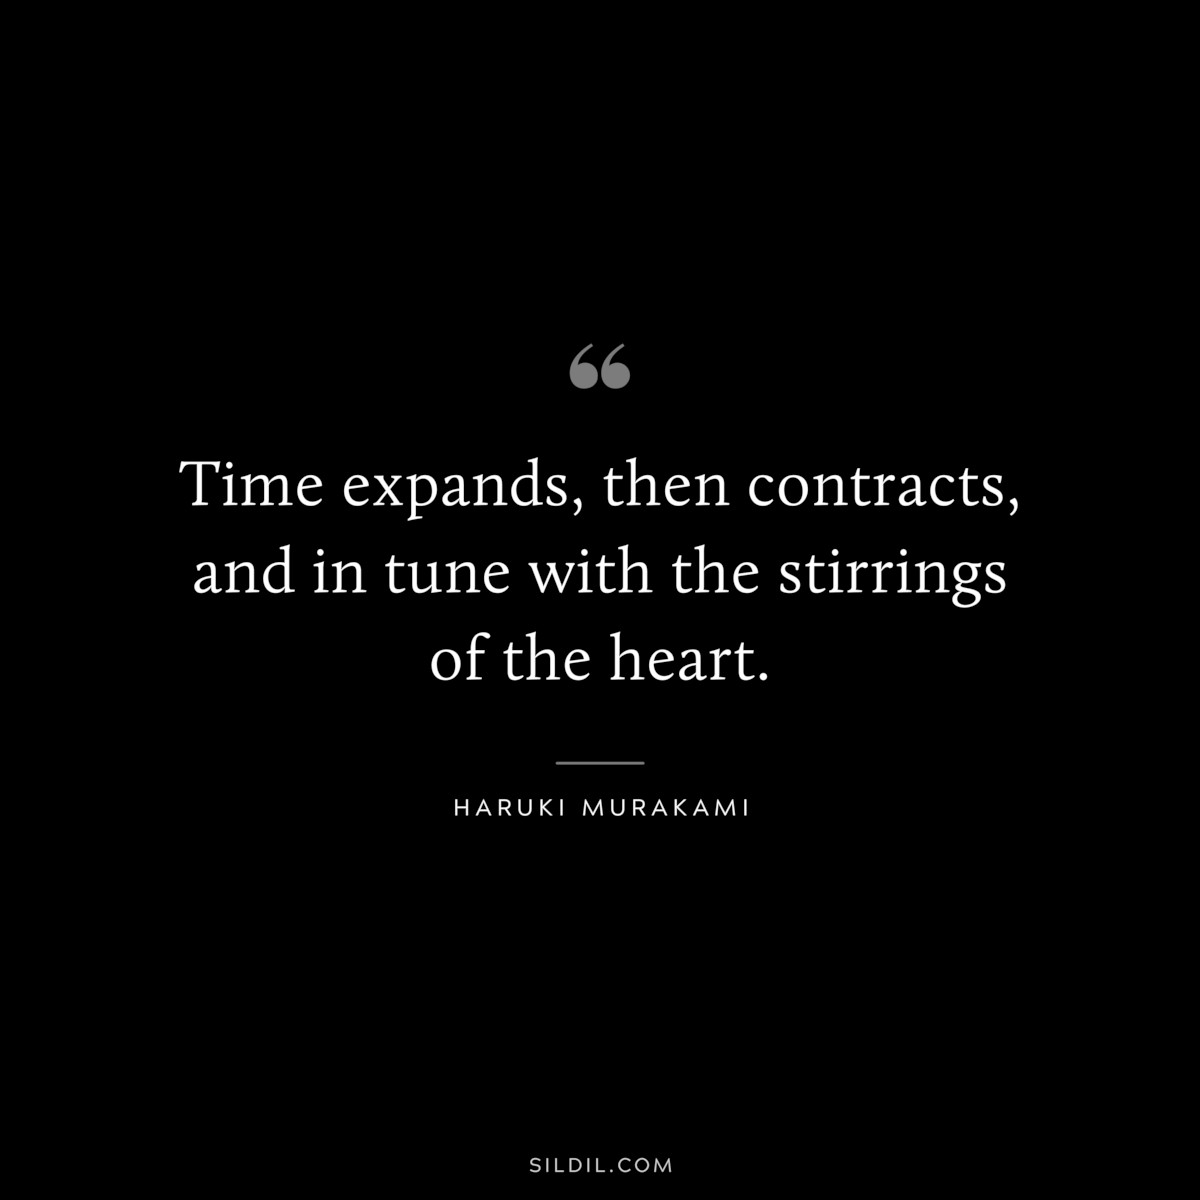 Time expands, then contracts, and in tune with the stirrings of the heart. ― Haruki Murakami